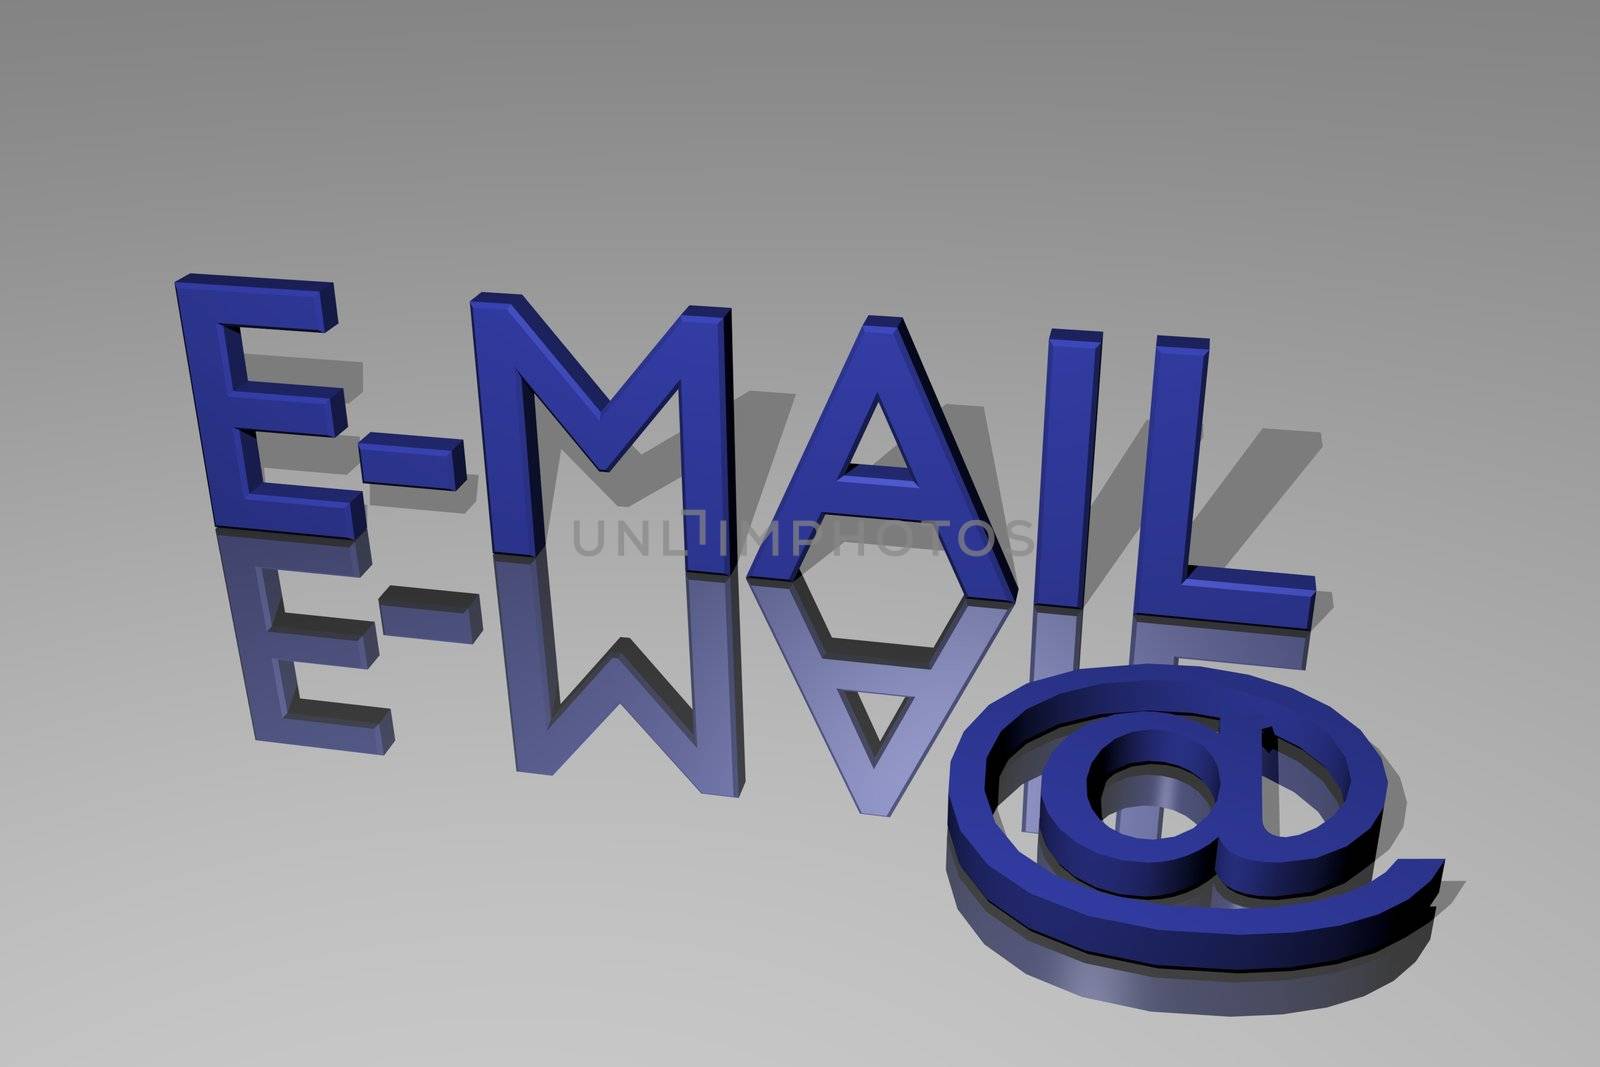 Email as a 3d lettering next to a web symbol.